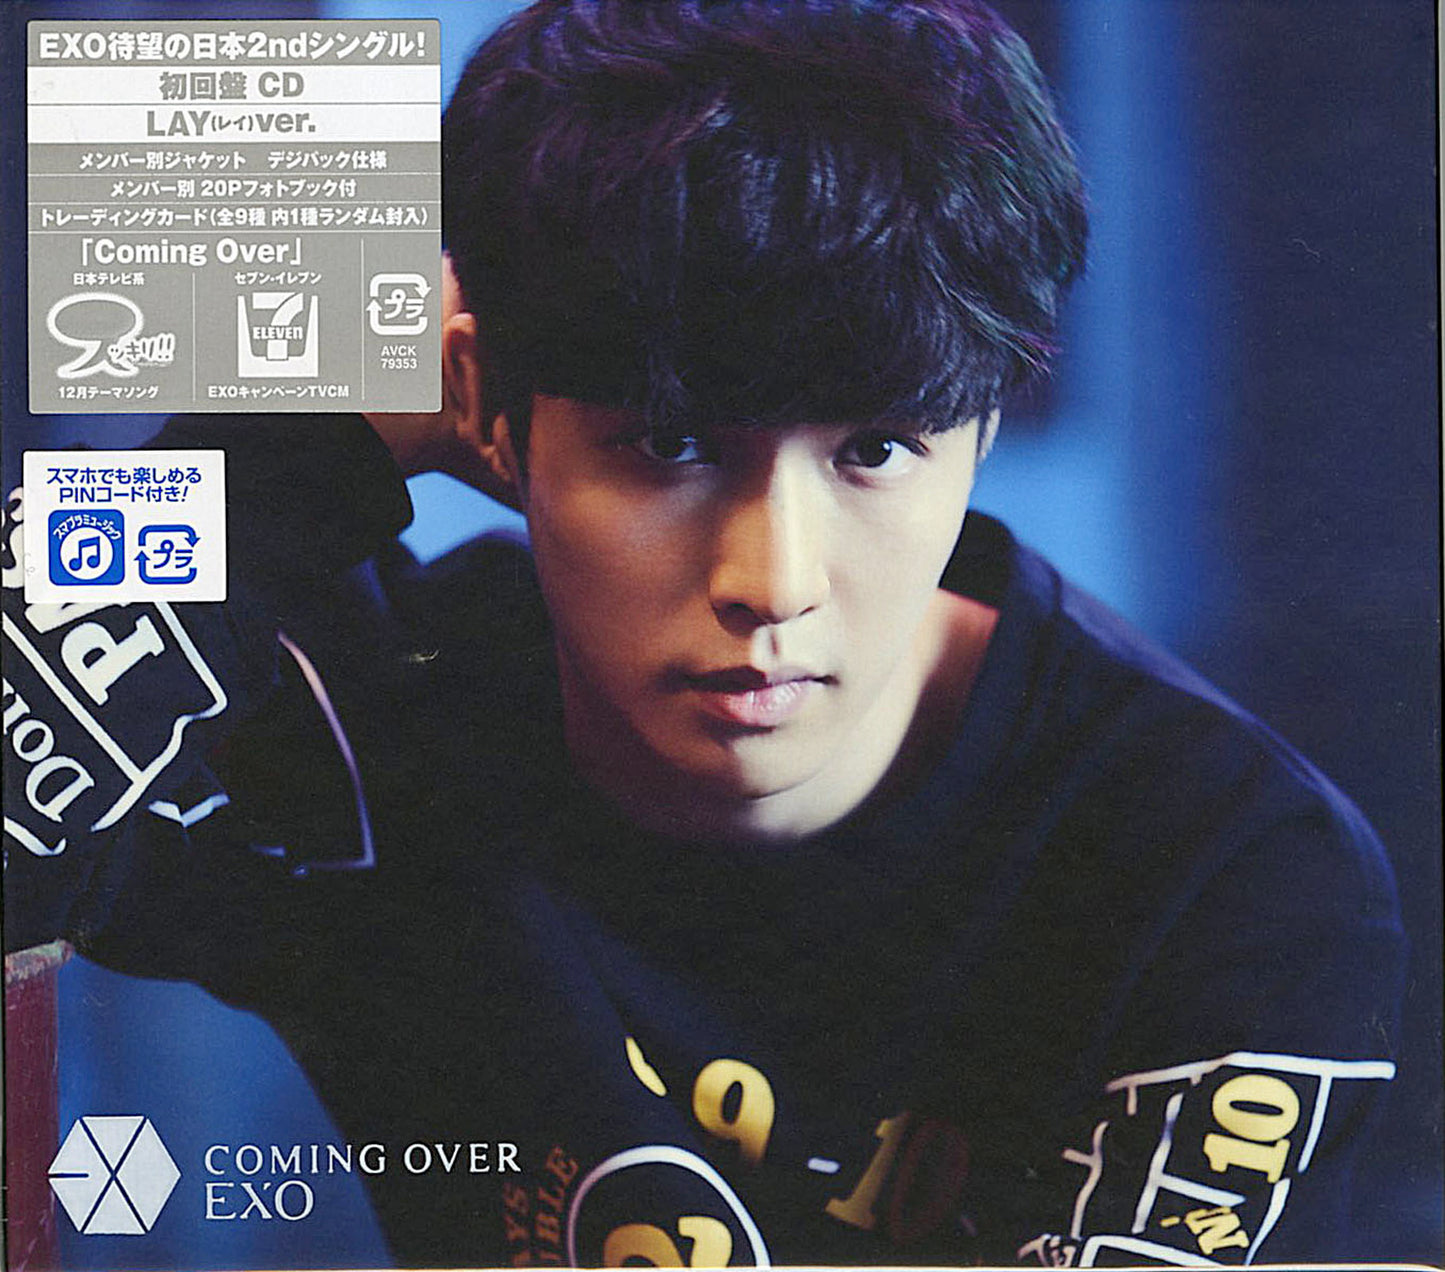 Exo - Coming Over (Lay Ver.) - Japan  CD Limited Edition